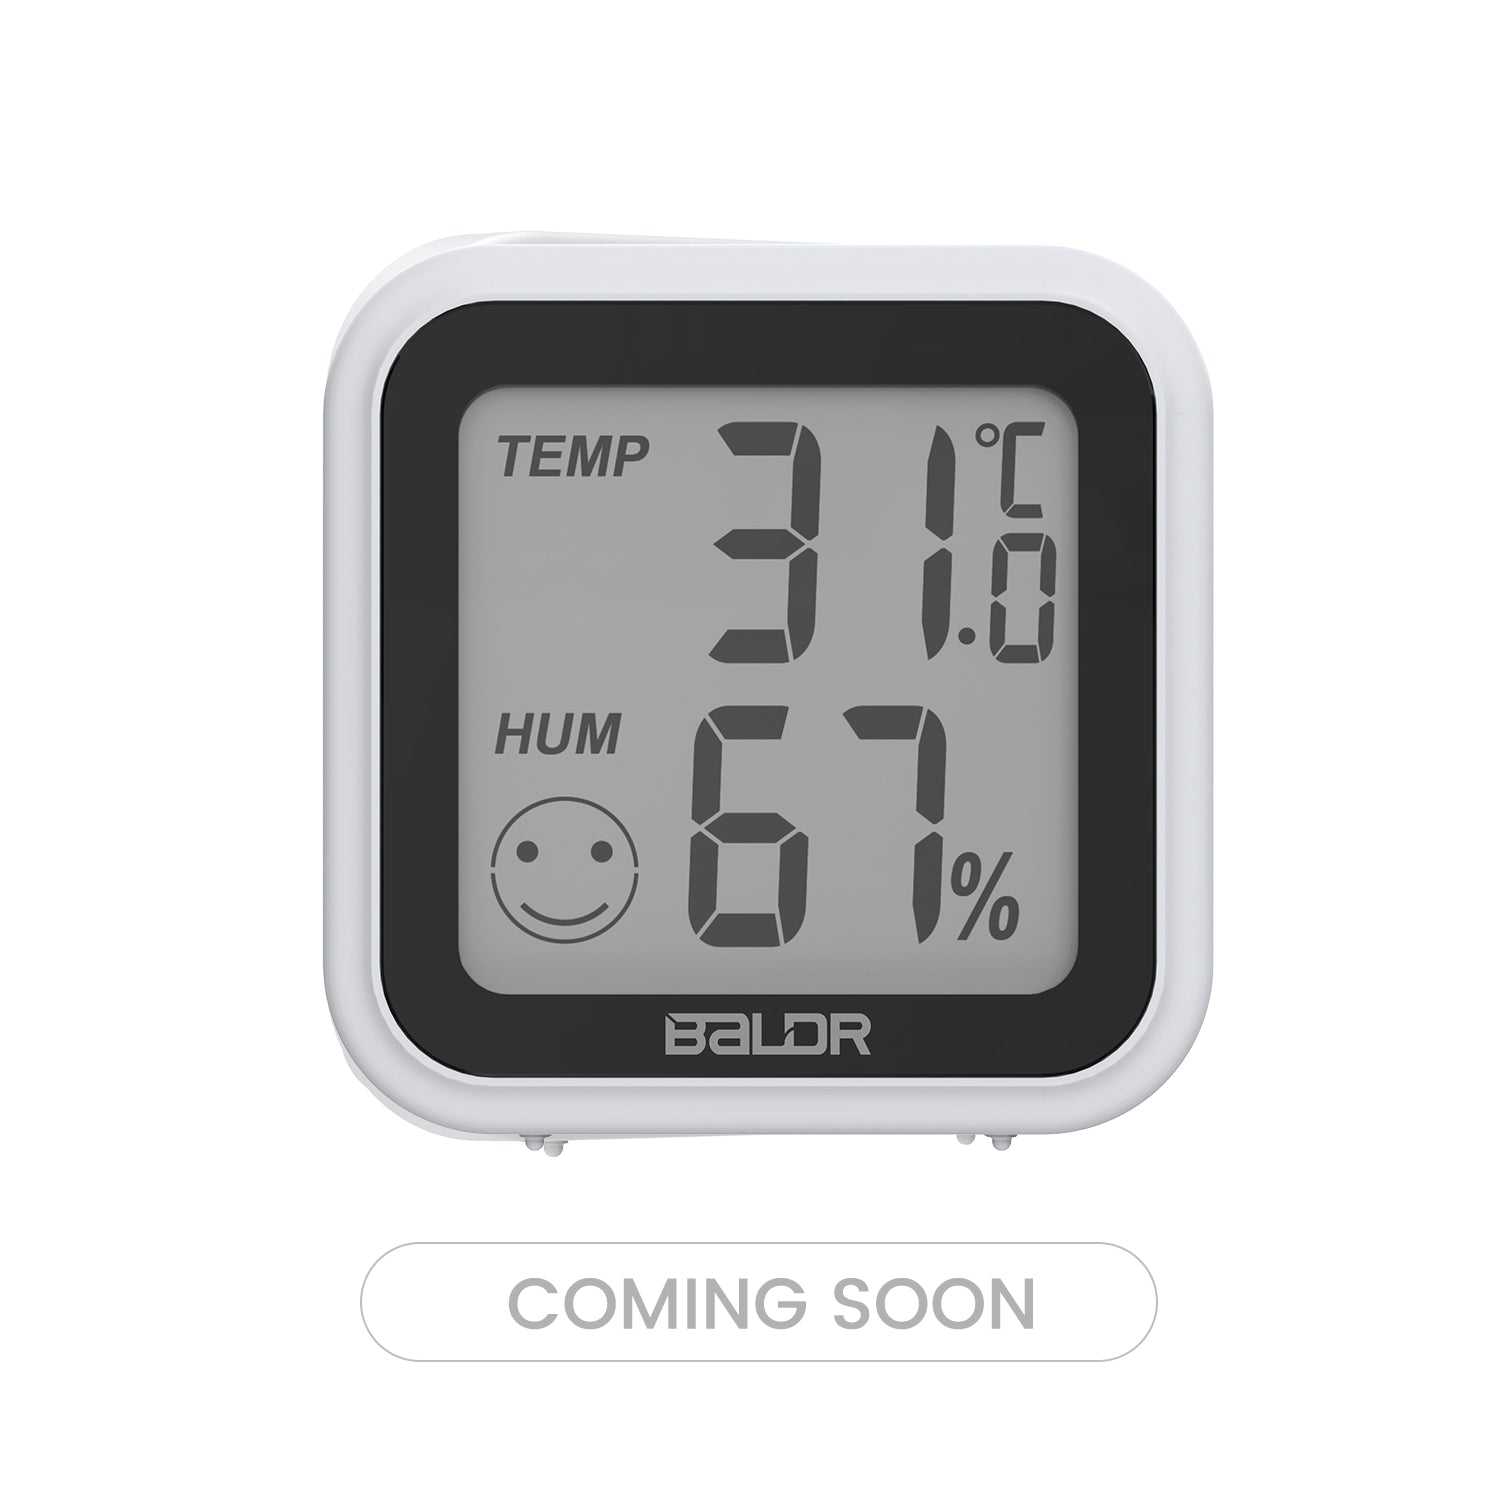 Baldr Smart Thermo-hygrometer HS015